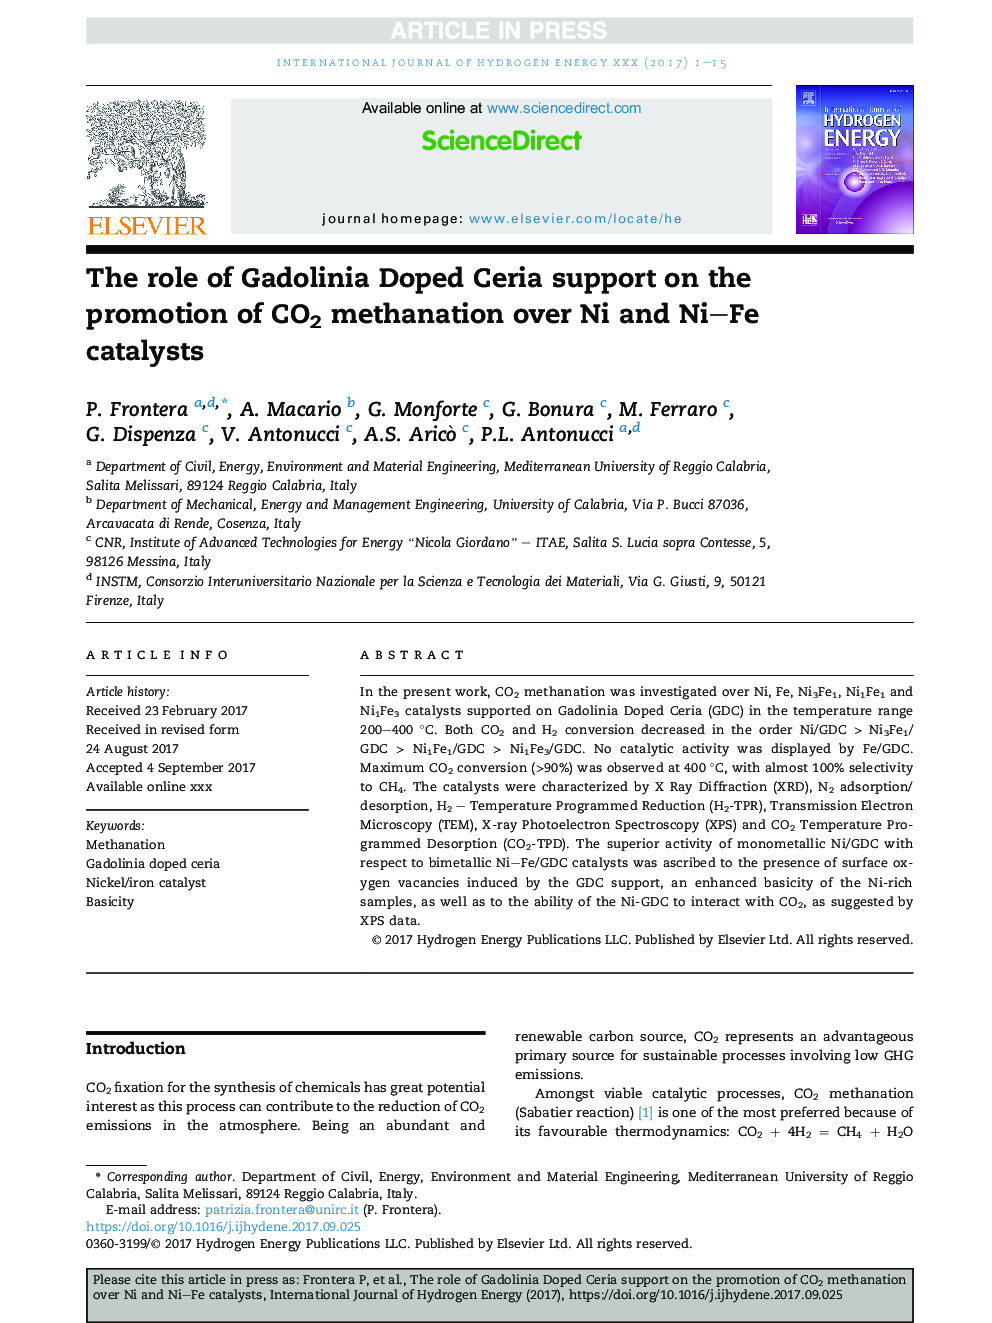 The role of Gadolinia Doped Ceria support on the promotion of CO2 methanation over Ni and NiFe catalysts